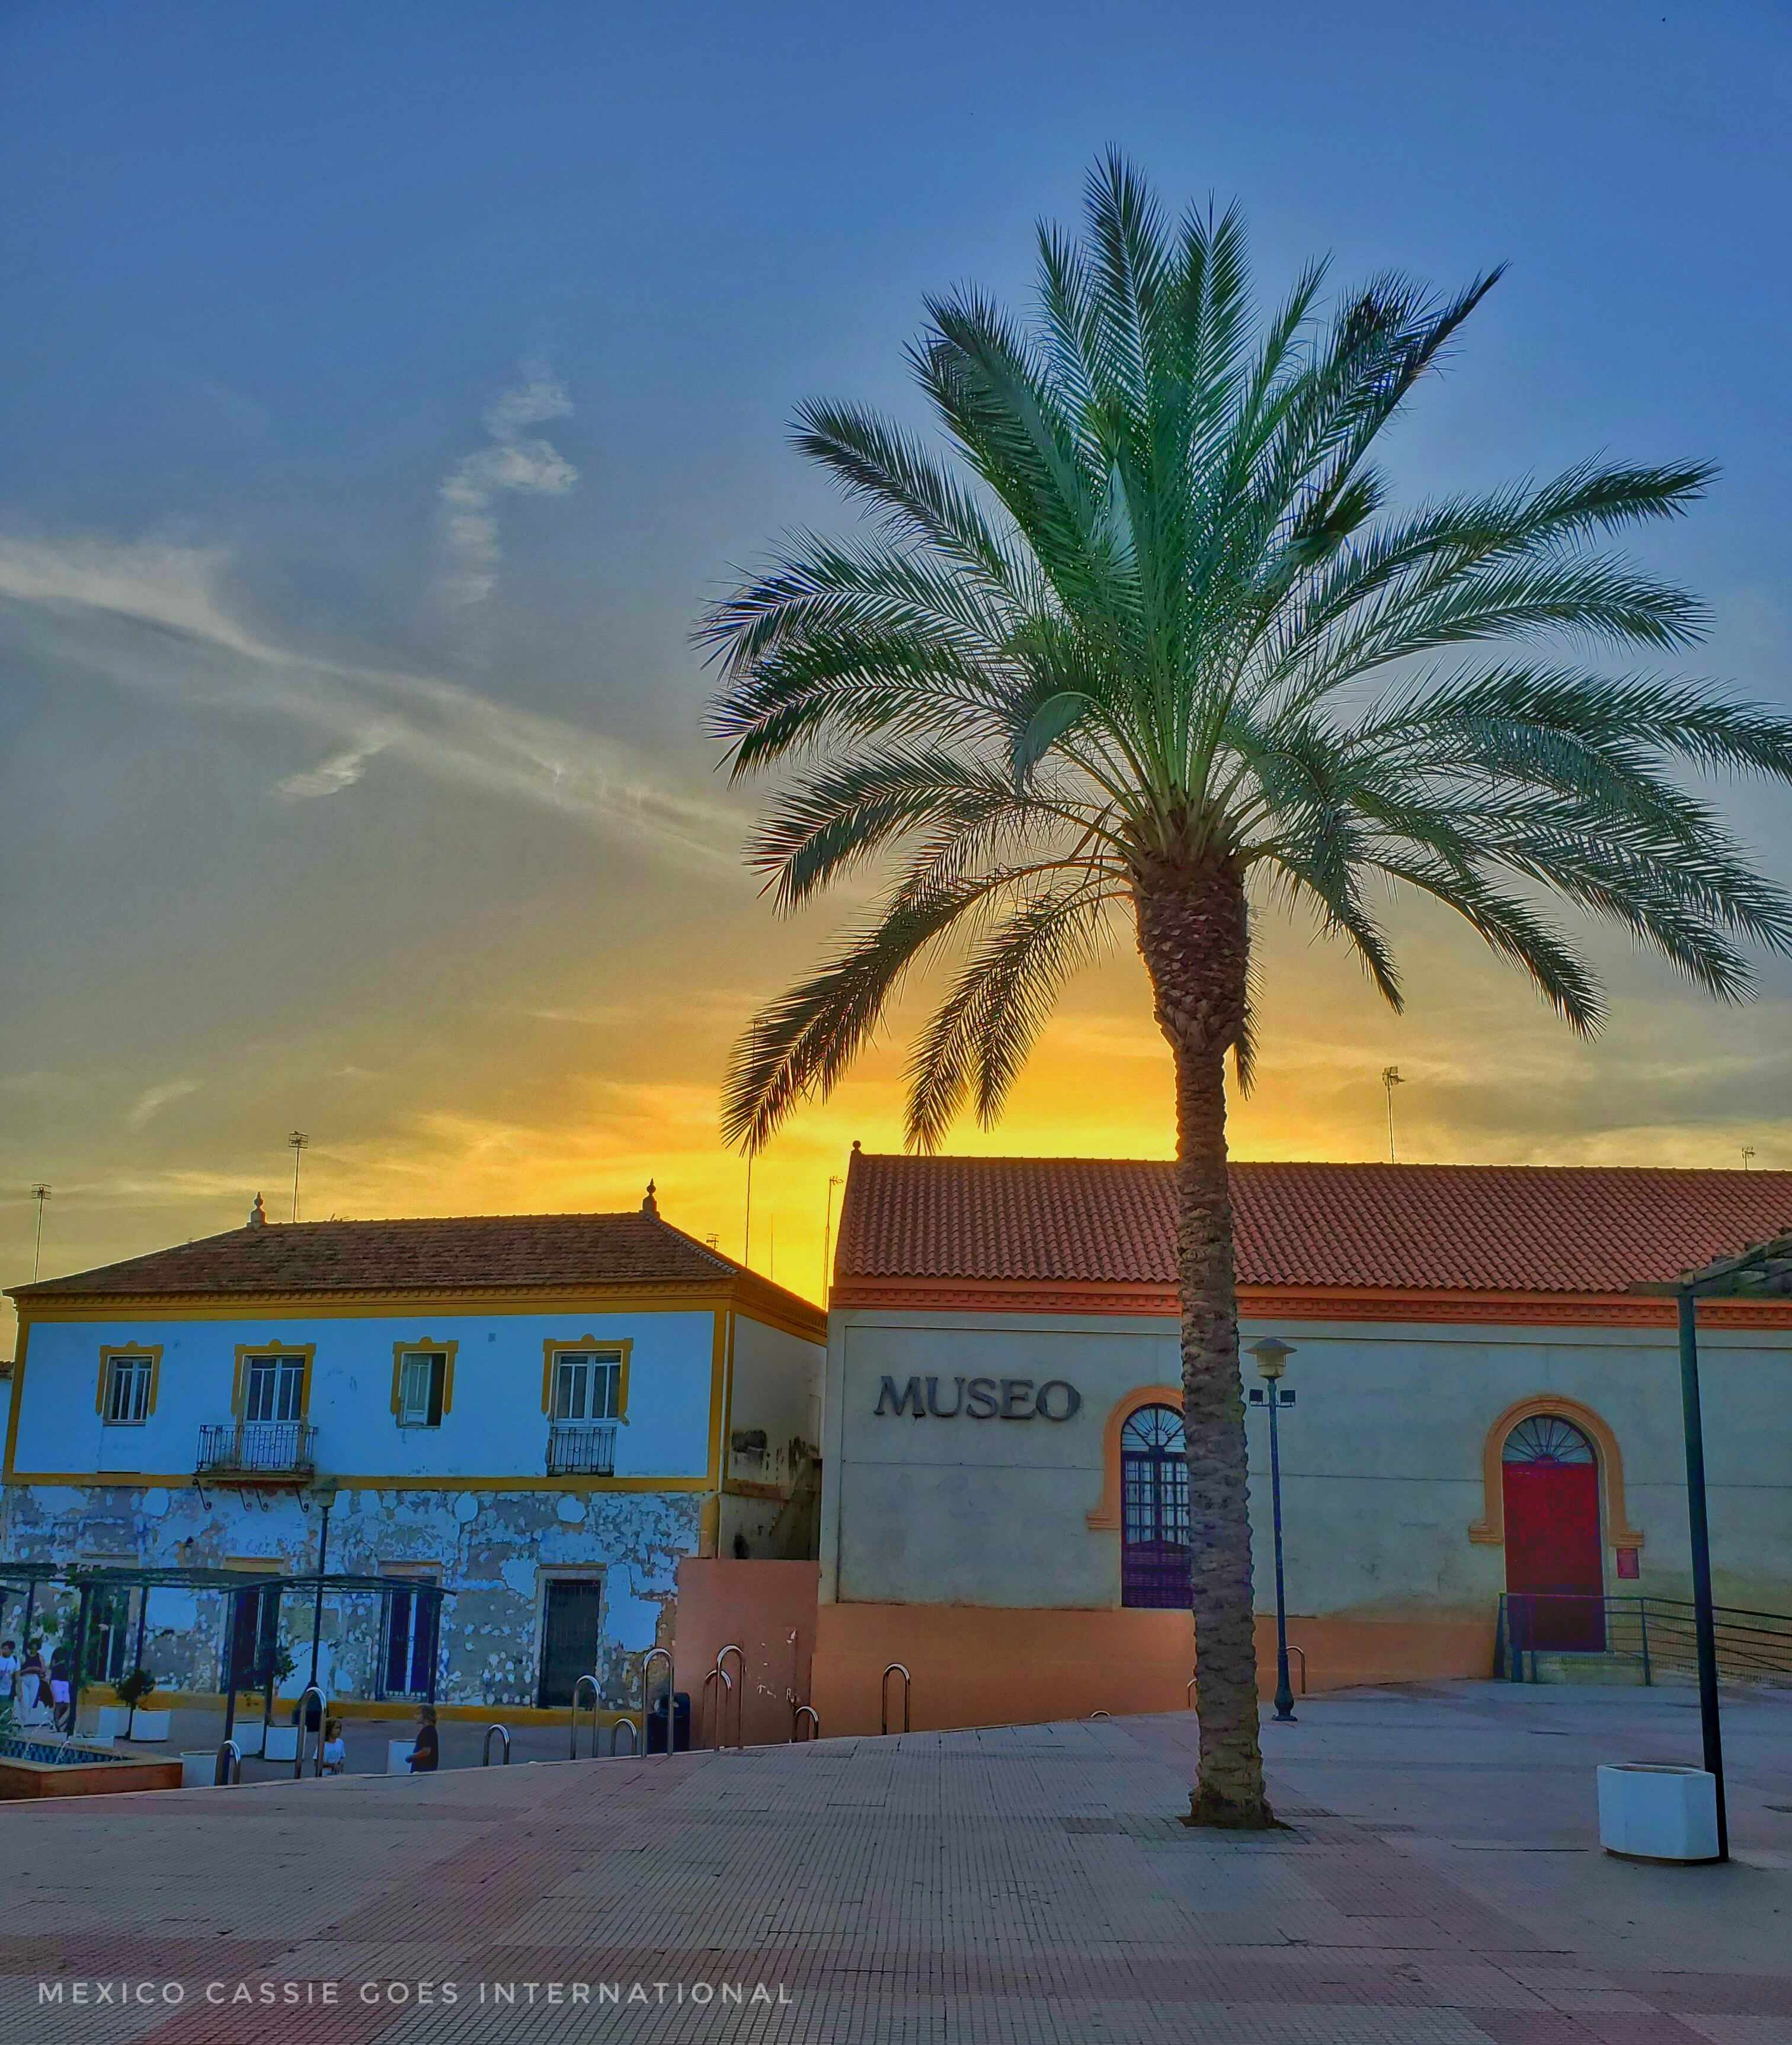 gentle early dusk light over museum building on a plaza. one large palm tree.